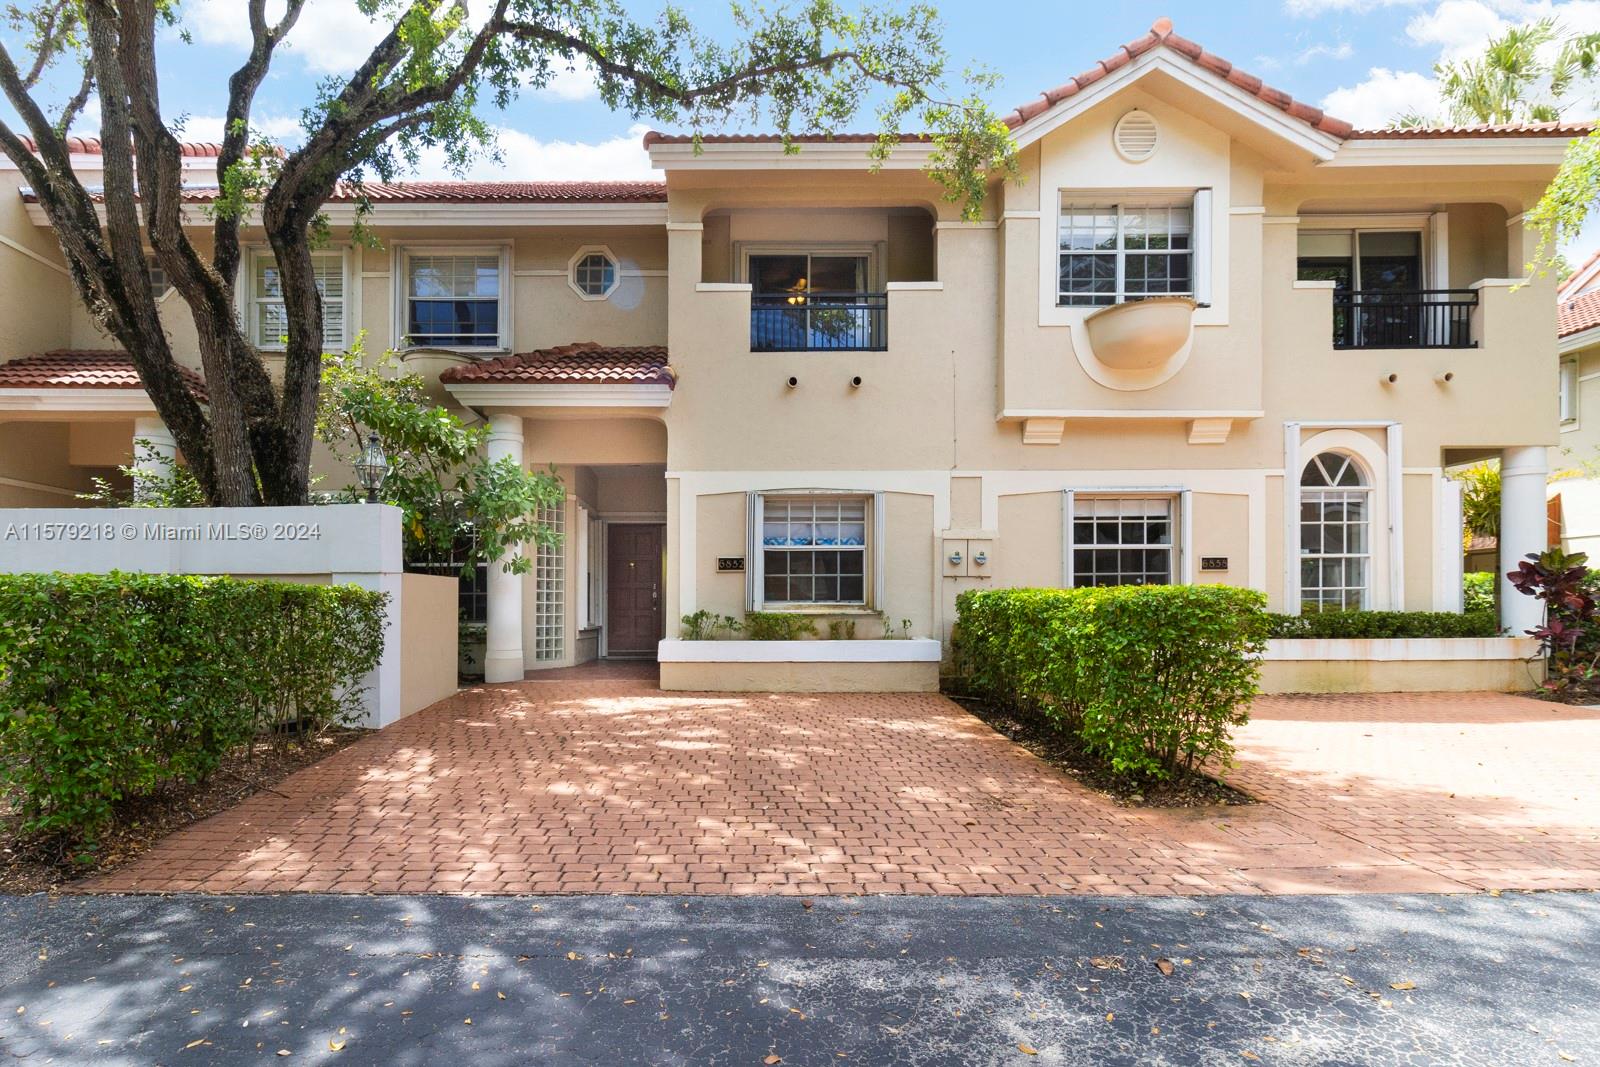 Rarely available unit with the desirable south facing patio/quiet side in Pinecrest's "Sutton Place," a community of only 28 townhomes in Pinecrest school district and an easy walk to the metrorail.  3 upstairs bedrooms, high ceilings, skylight, large updated eat-in kitchen, open living space, porcelain and carpet floors, lovely open and large private patio.  Fully gated and secure community with a pool, tennis court, and guest parking.